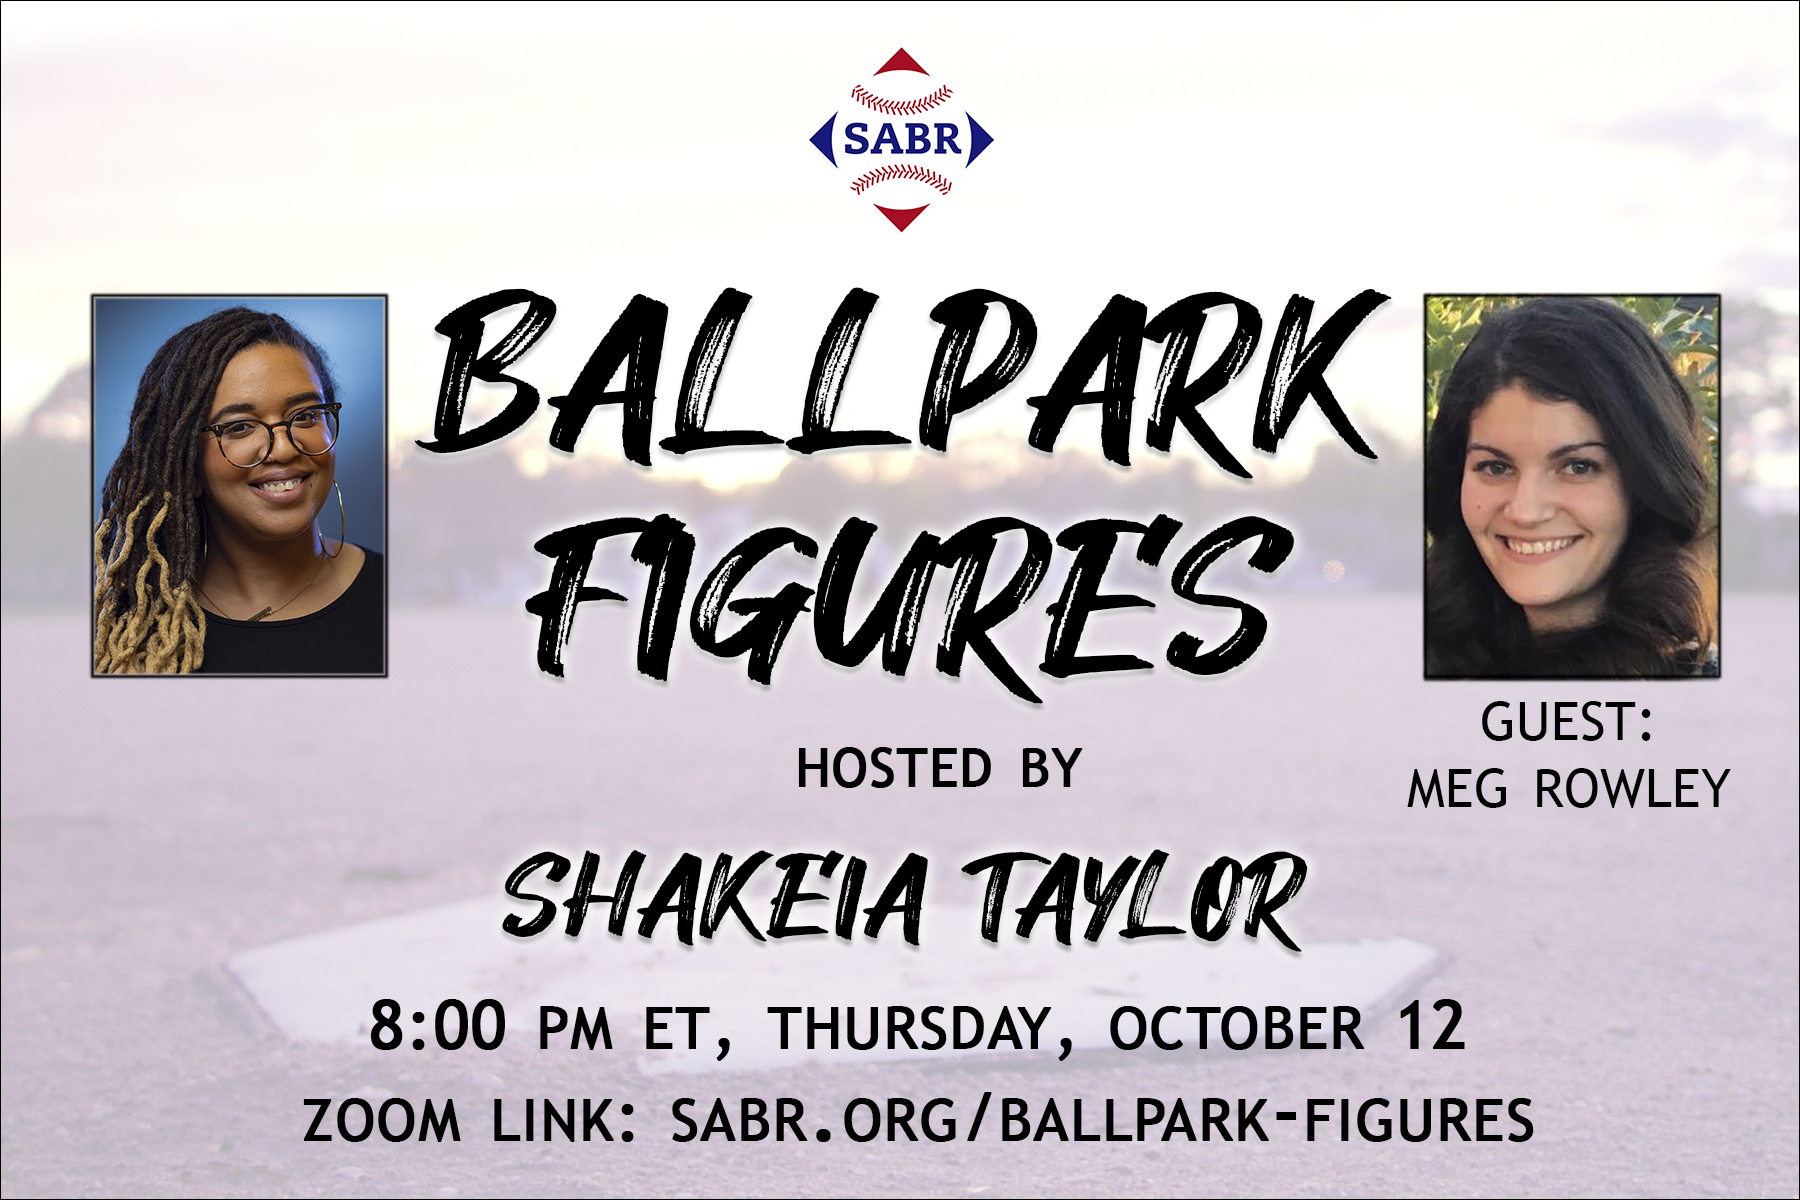 Join us on October 12 for SABR's Ballpark Figures with Shakeia Taylor and Meg Rowley